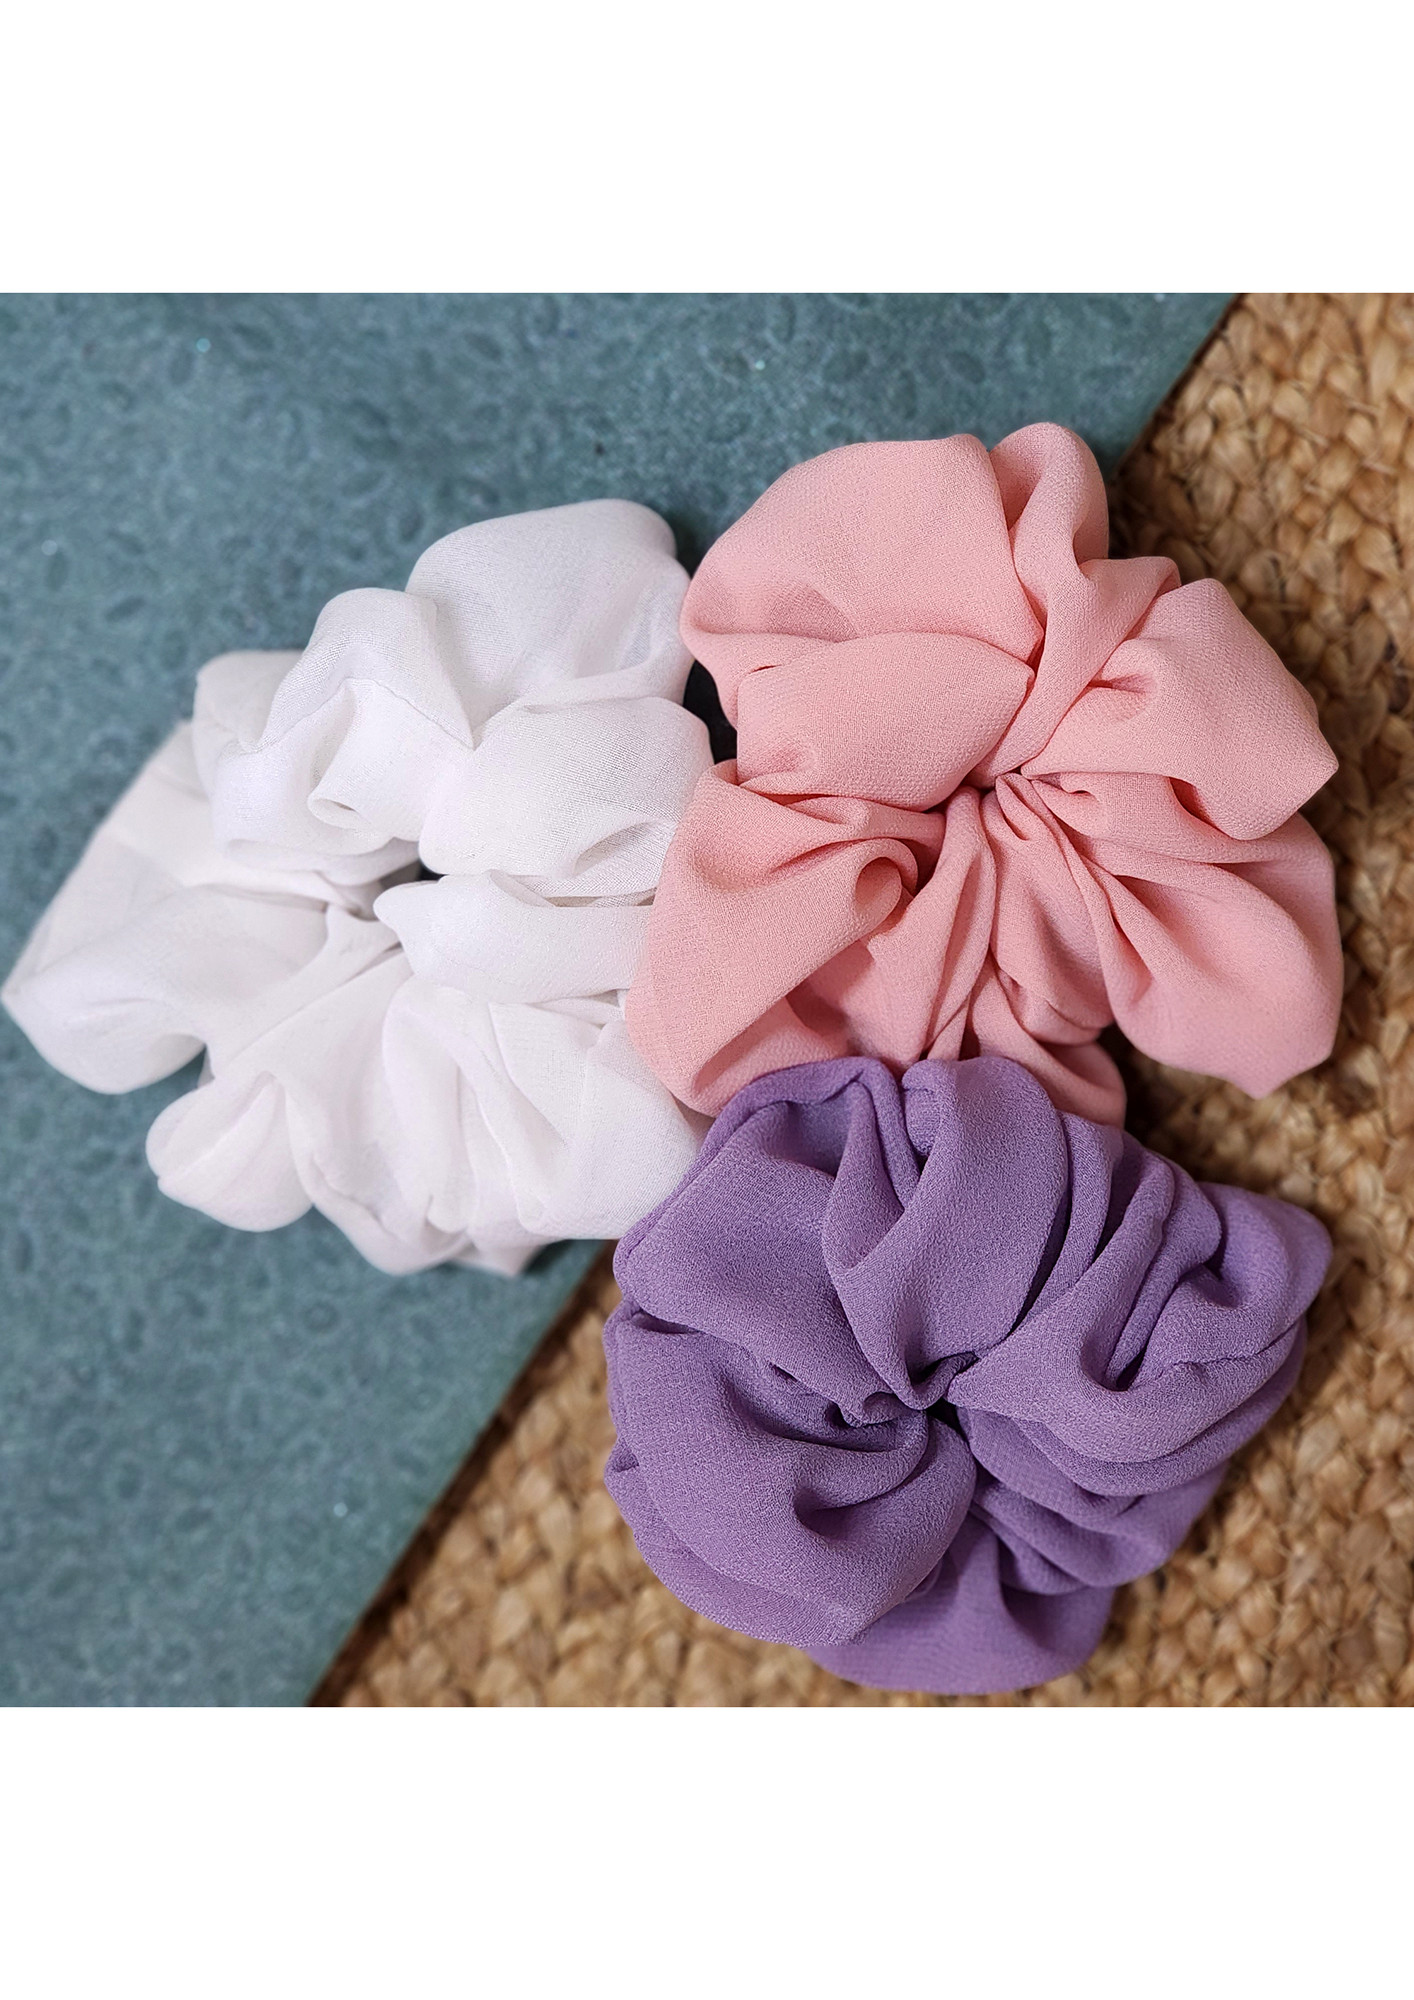 Colorful Scrunchies Bright Colors Puffy Look Pack of 3 For Girls by The Little Girl Store-LG_Scrunchies02